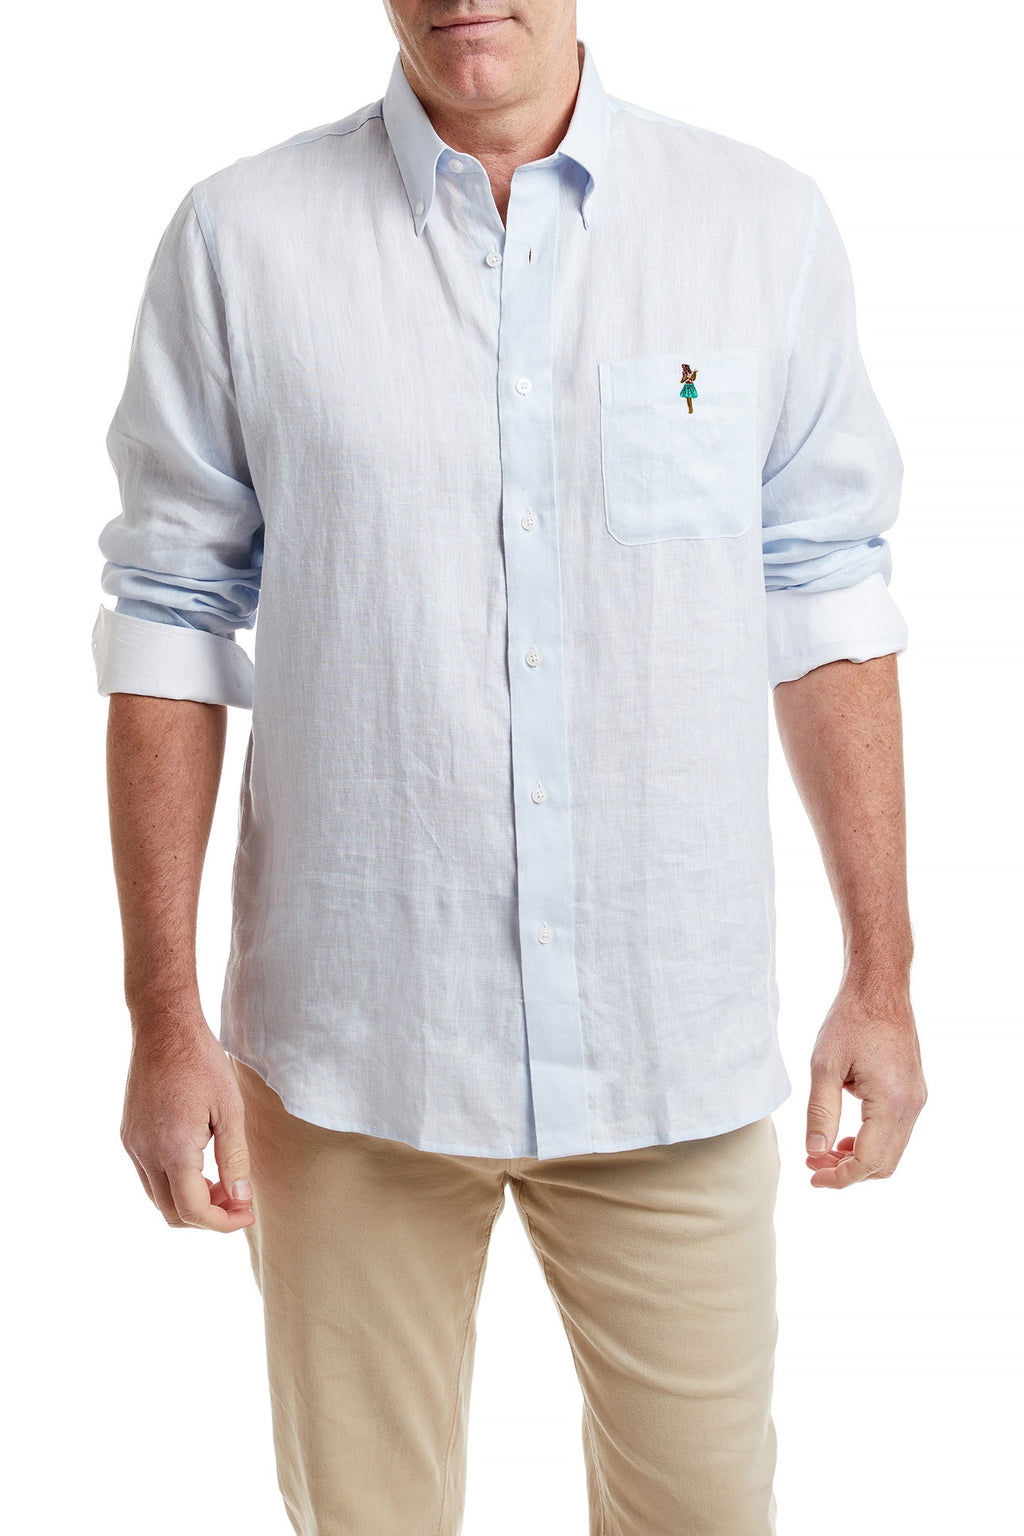 Chase Shirt Linen Powdered Blue with White Trim and Hula Girl MENS SPORT SHIRTS Castaway Nantucket Island